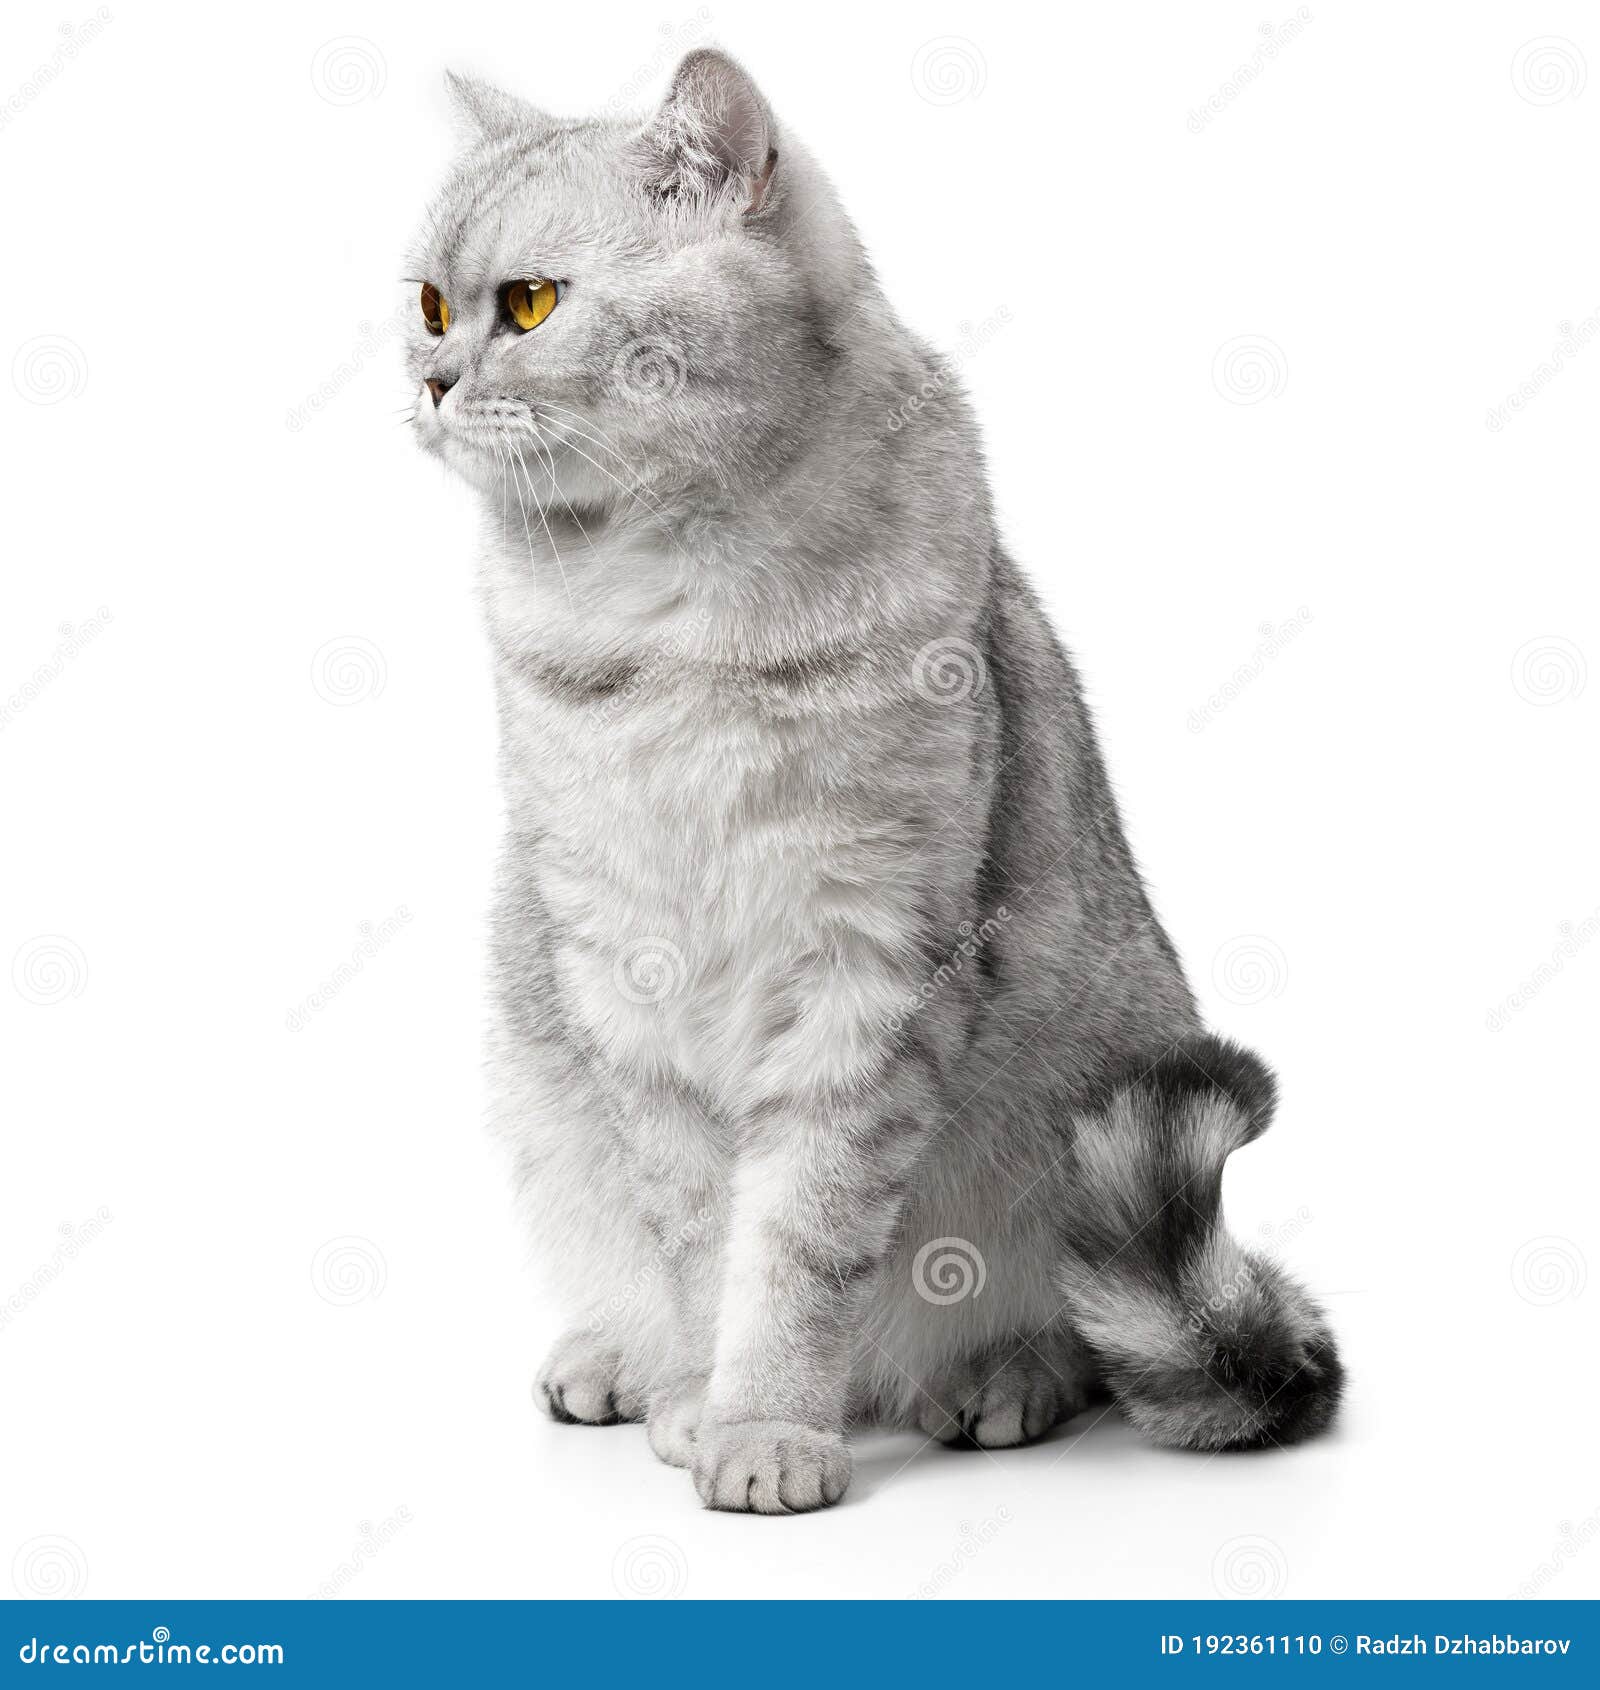 Angry cat looks in front. Stock Photo